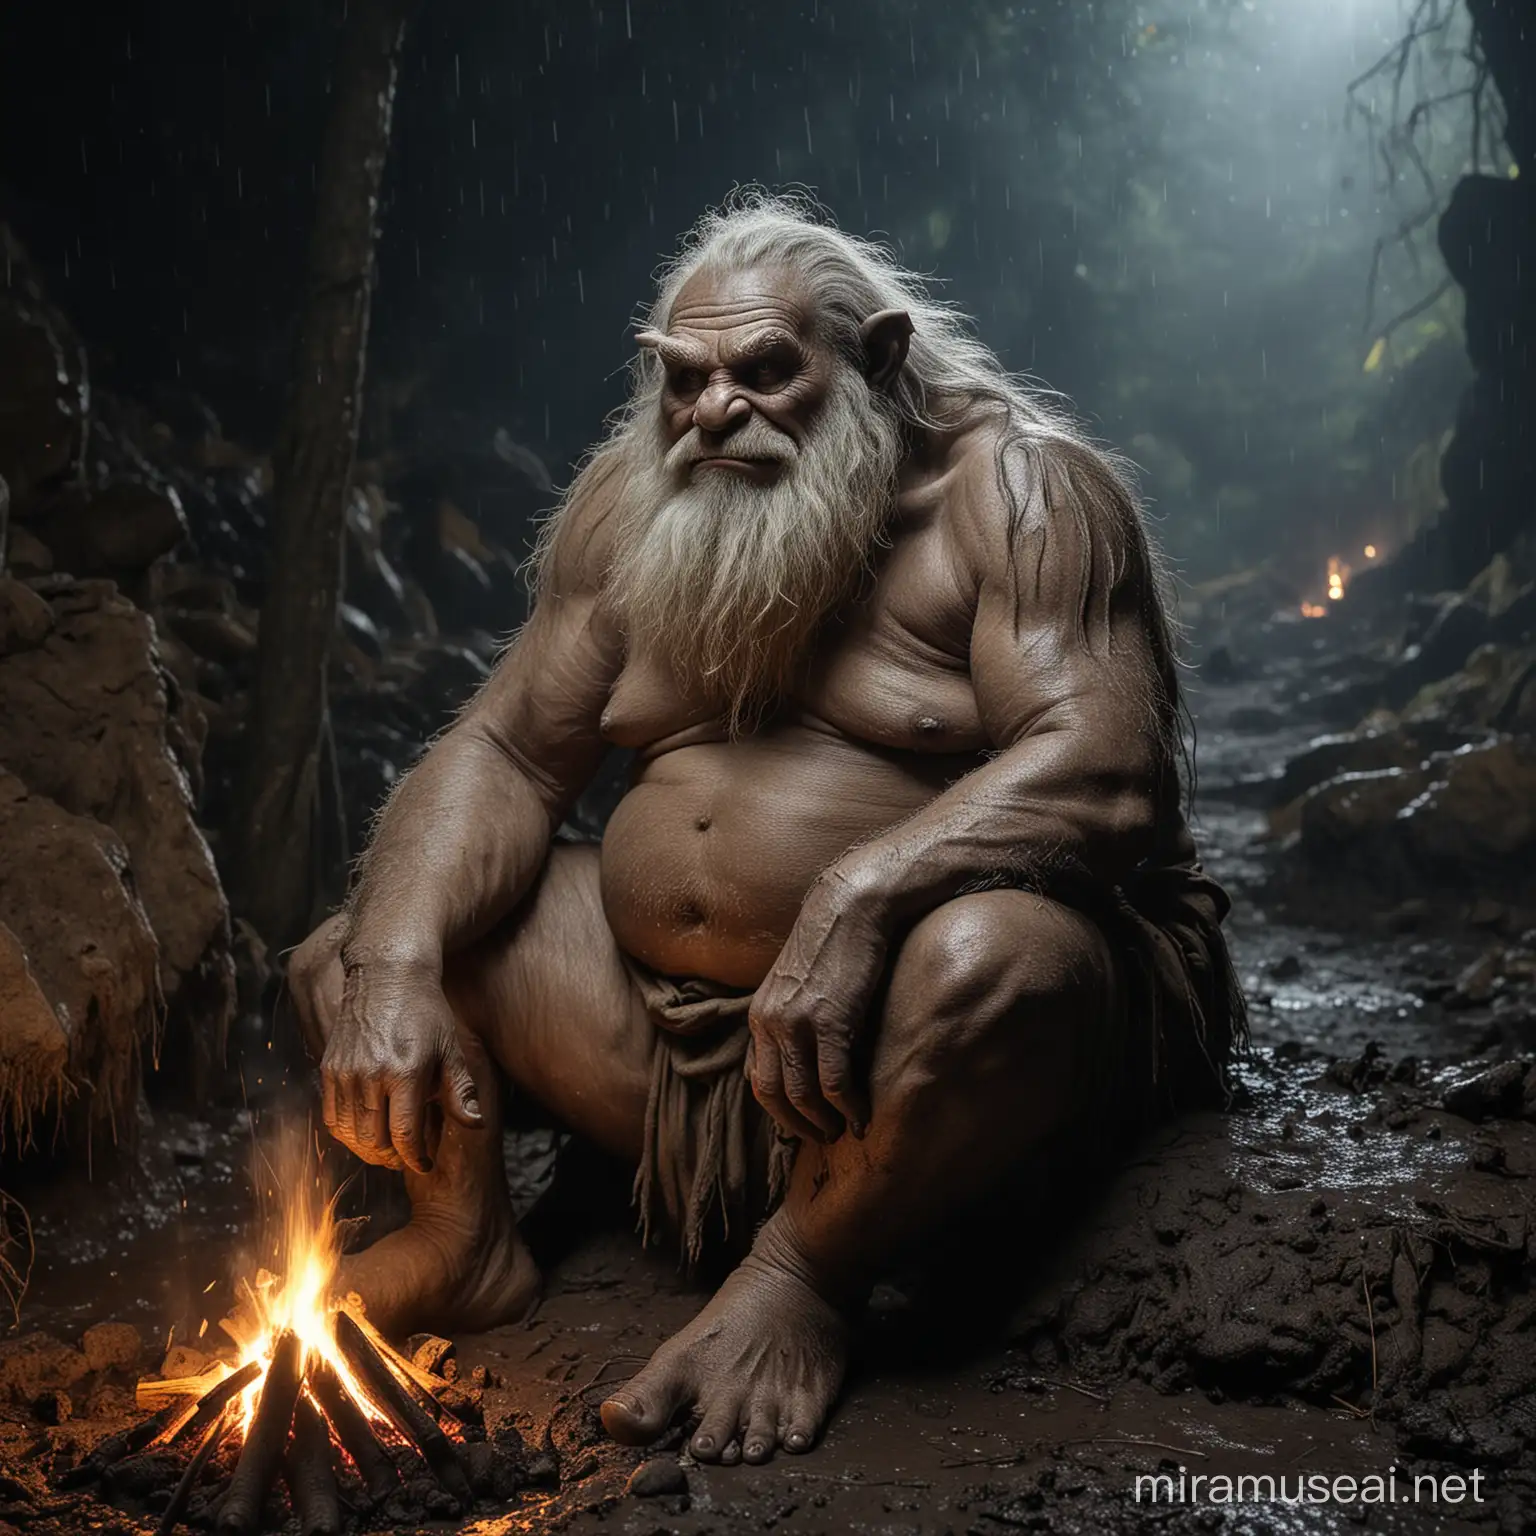 troll,forest cave,at midnight,bonfire,large feet,large hand,loincloth,dumpy,chubby,primitive,hairy,long beard,old age,sitting on the ground,rainy,wet dirty black mud cover hand and feet